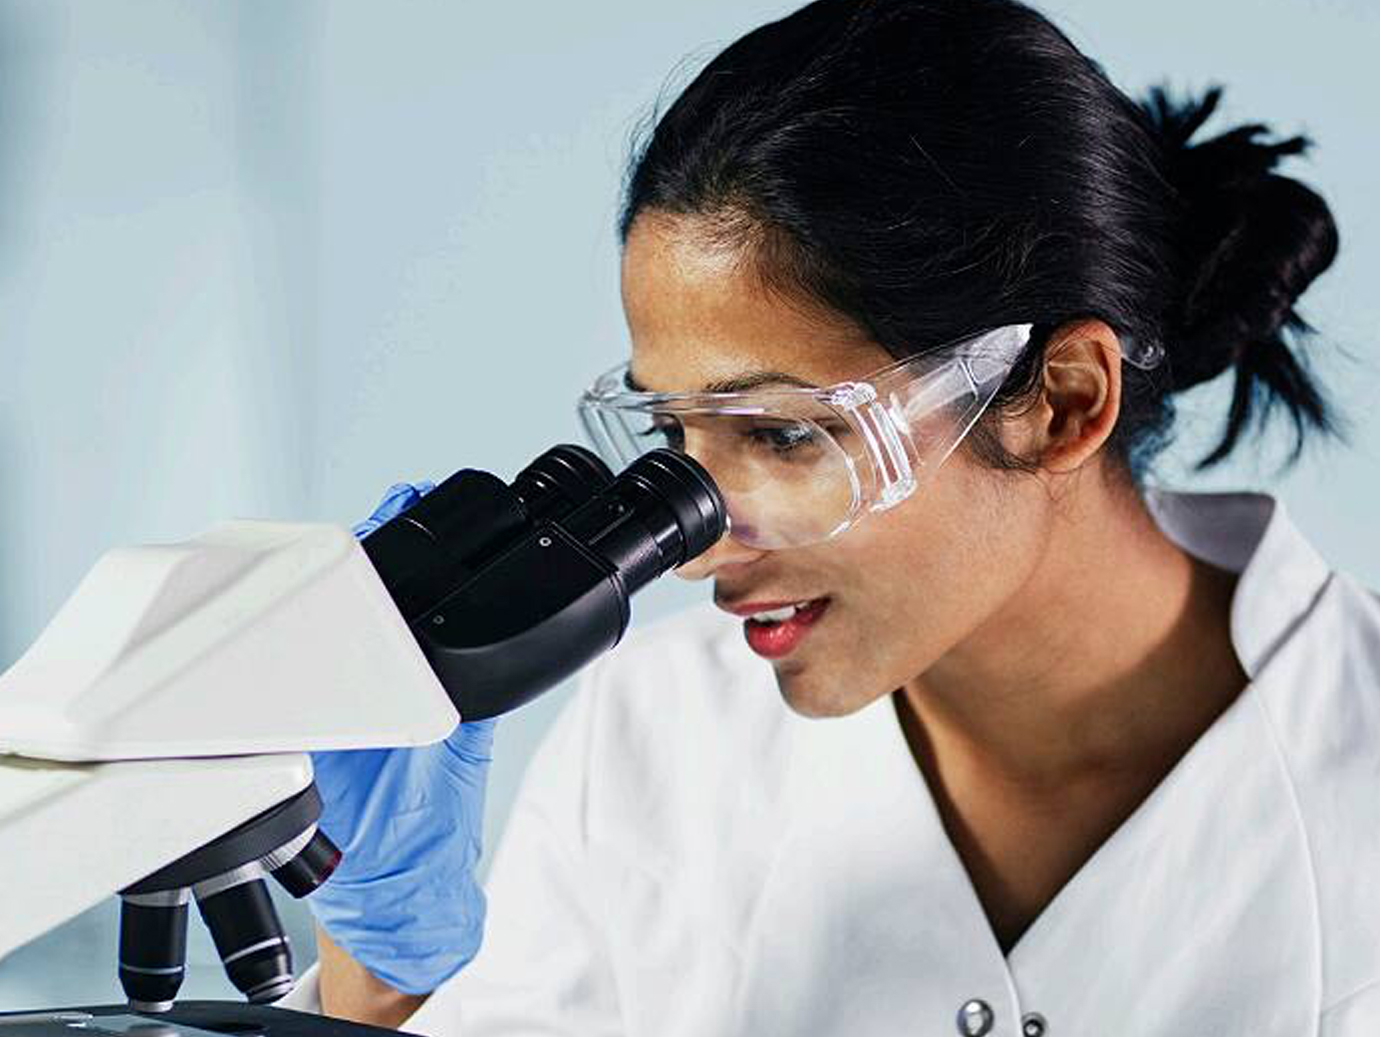 Female medical specialist looking through a microscope